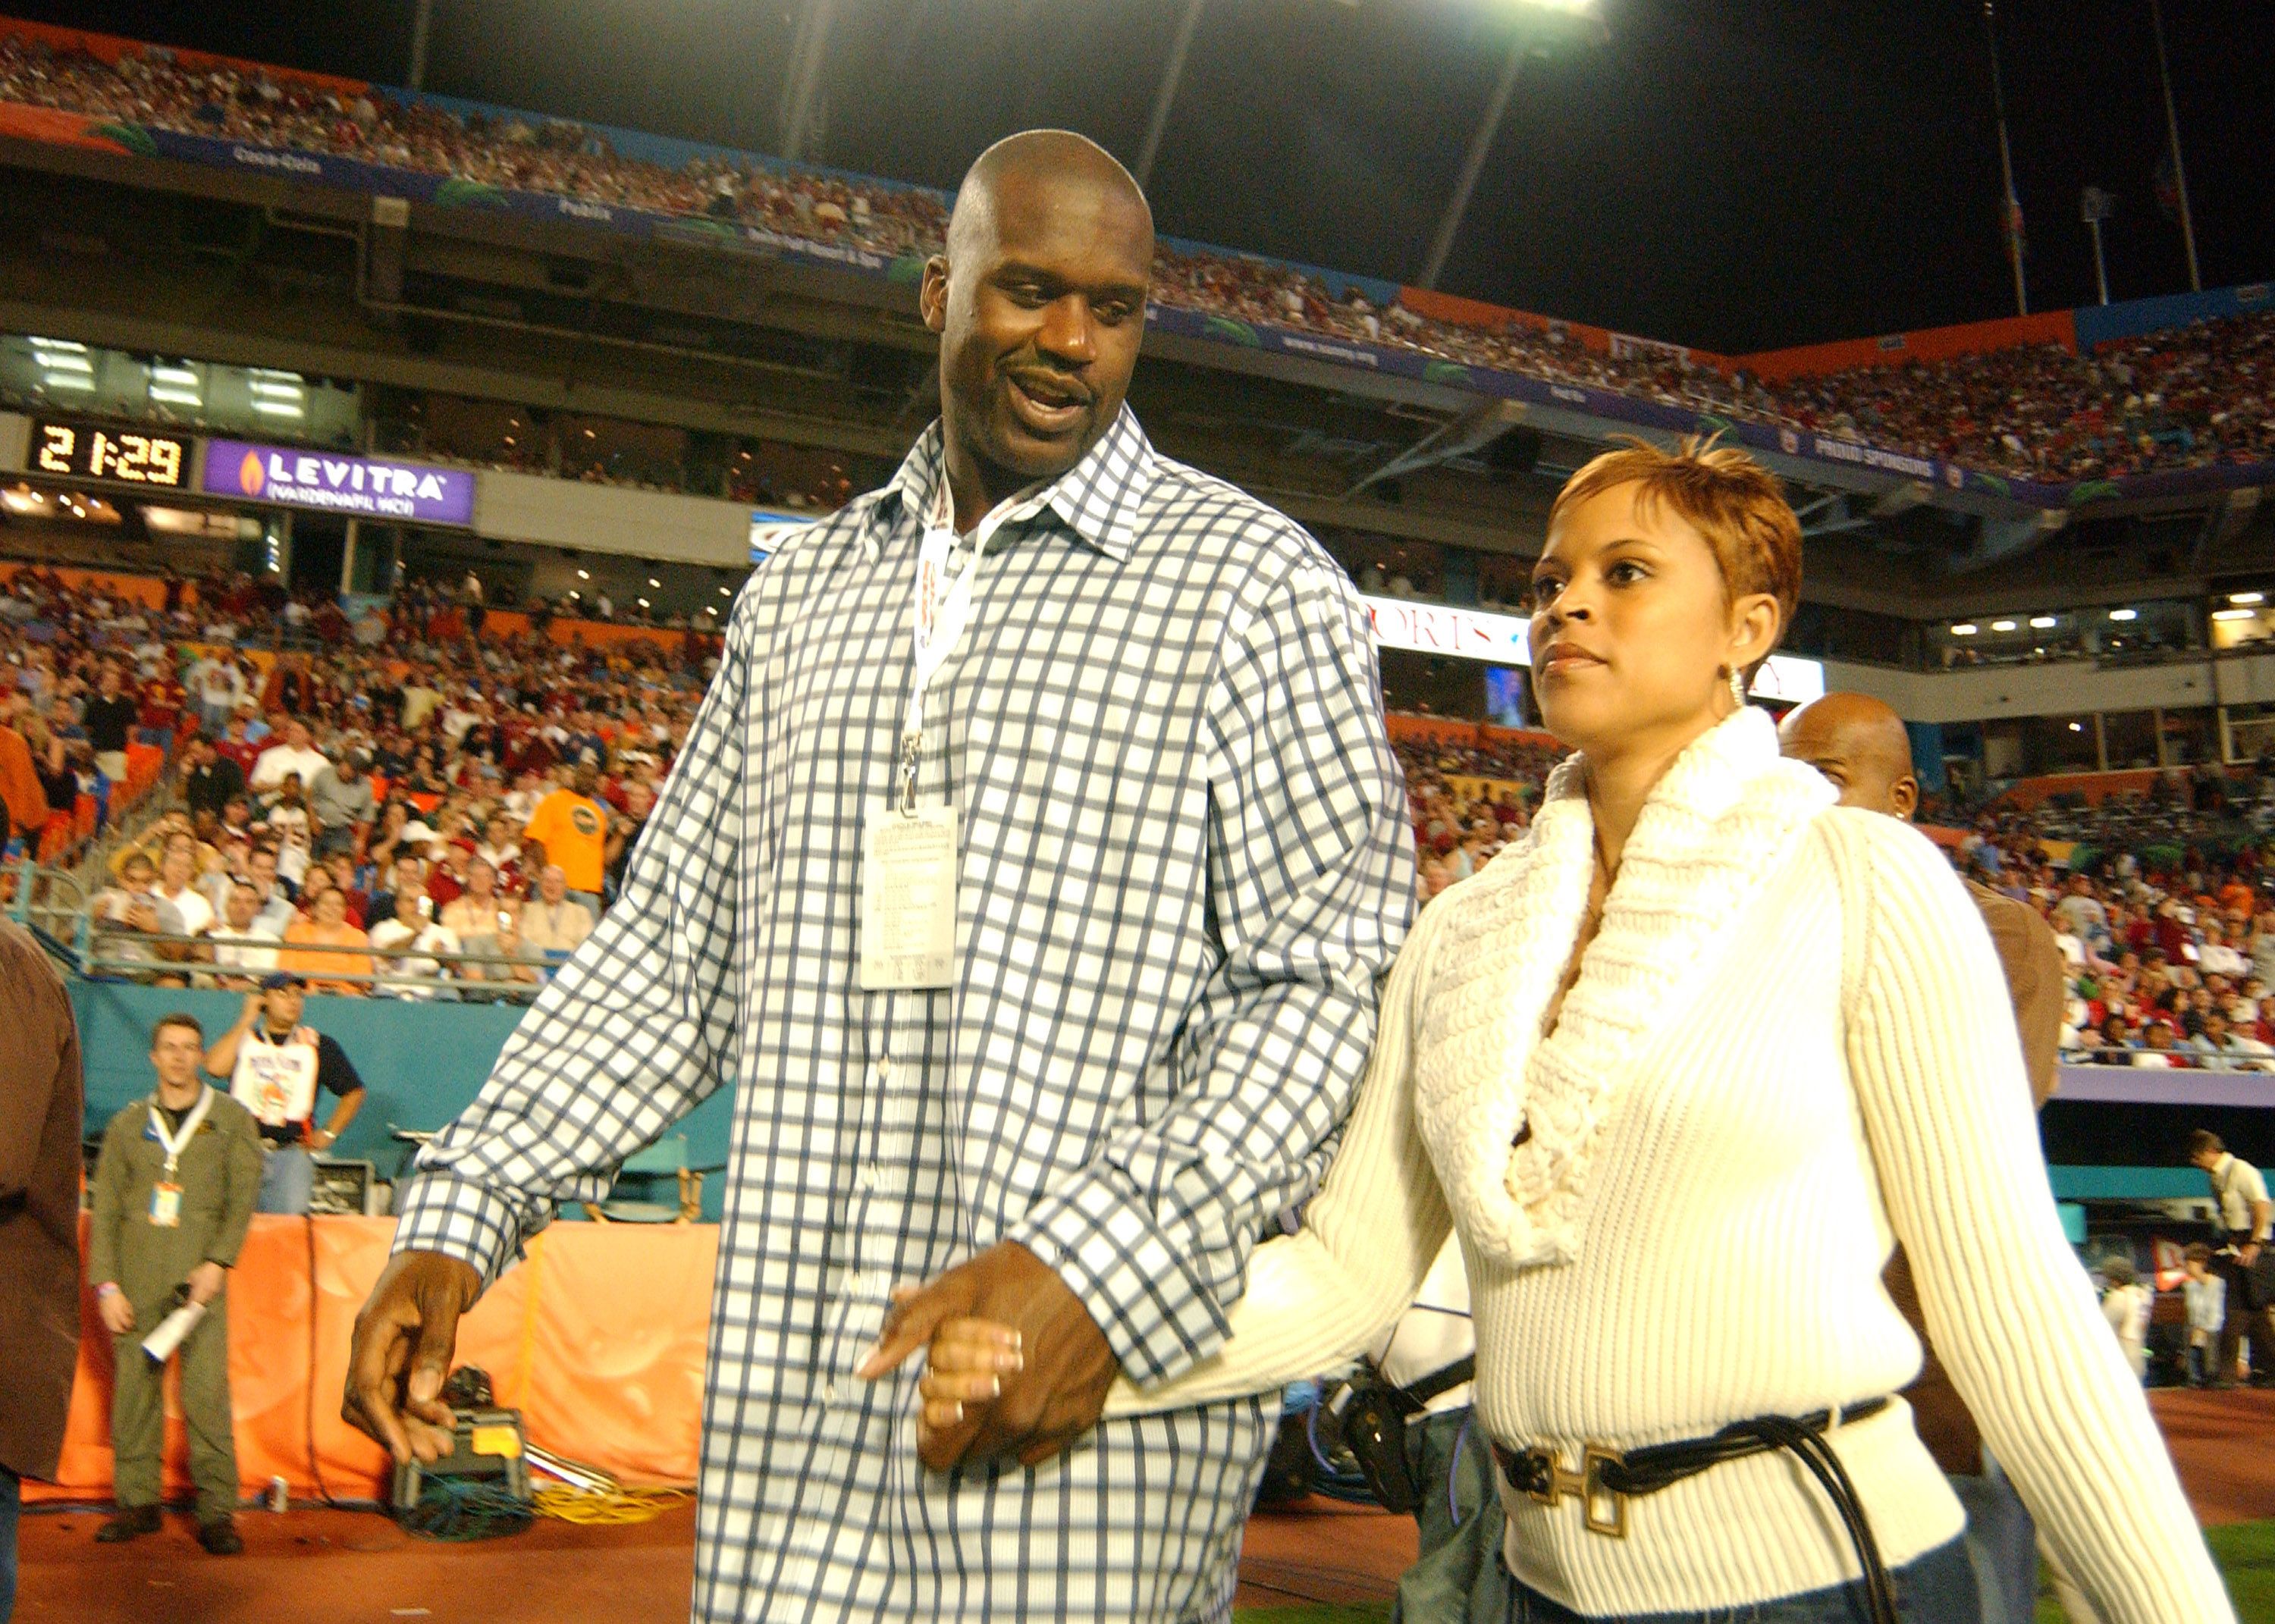 Shaquille O'Neal and wife Shaunie attend the FedEx Orange Bowl National Championship at Pro Player Stadium in Miami, Florida on January 4, 2005. | Source: Getty Images